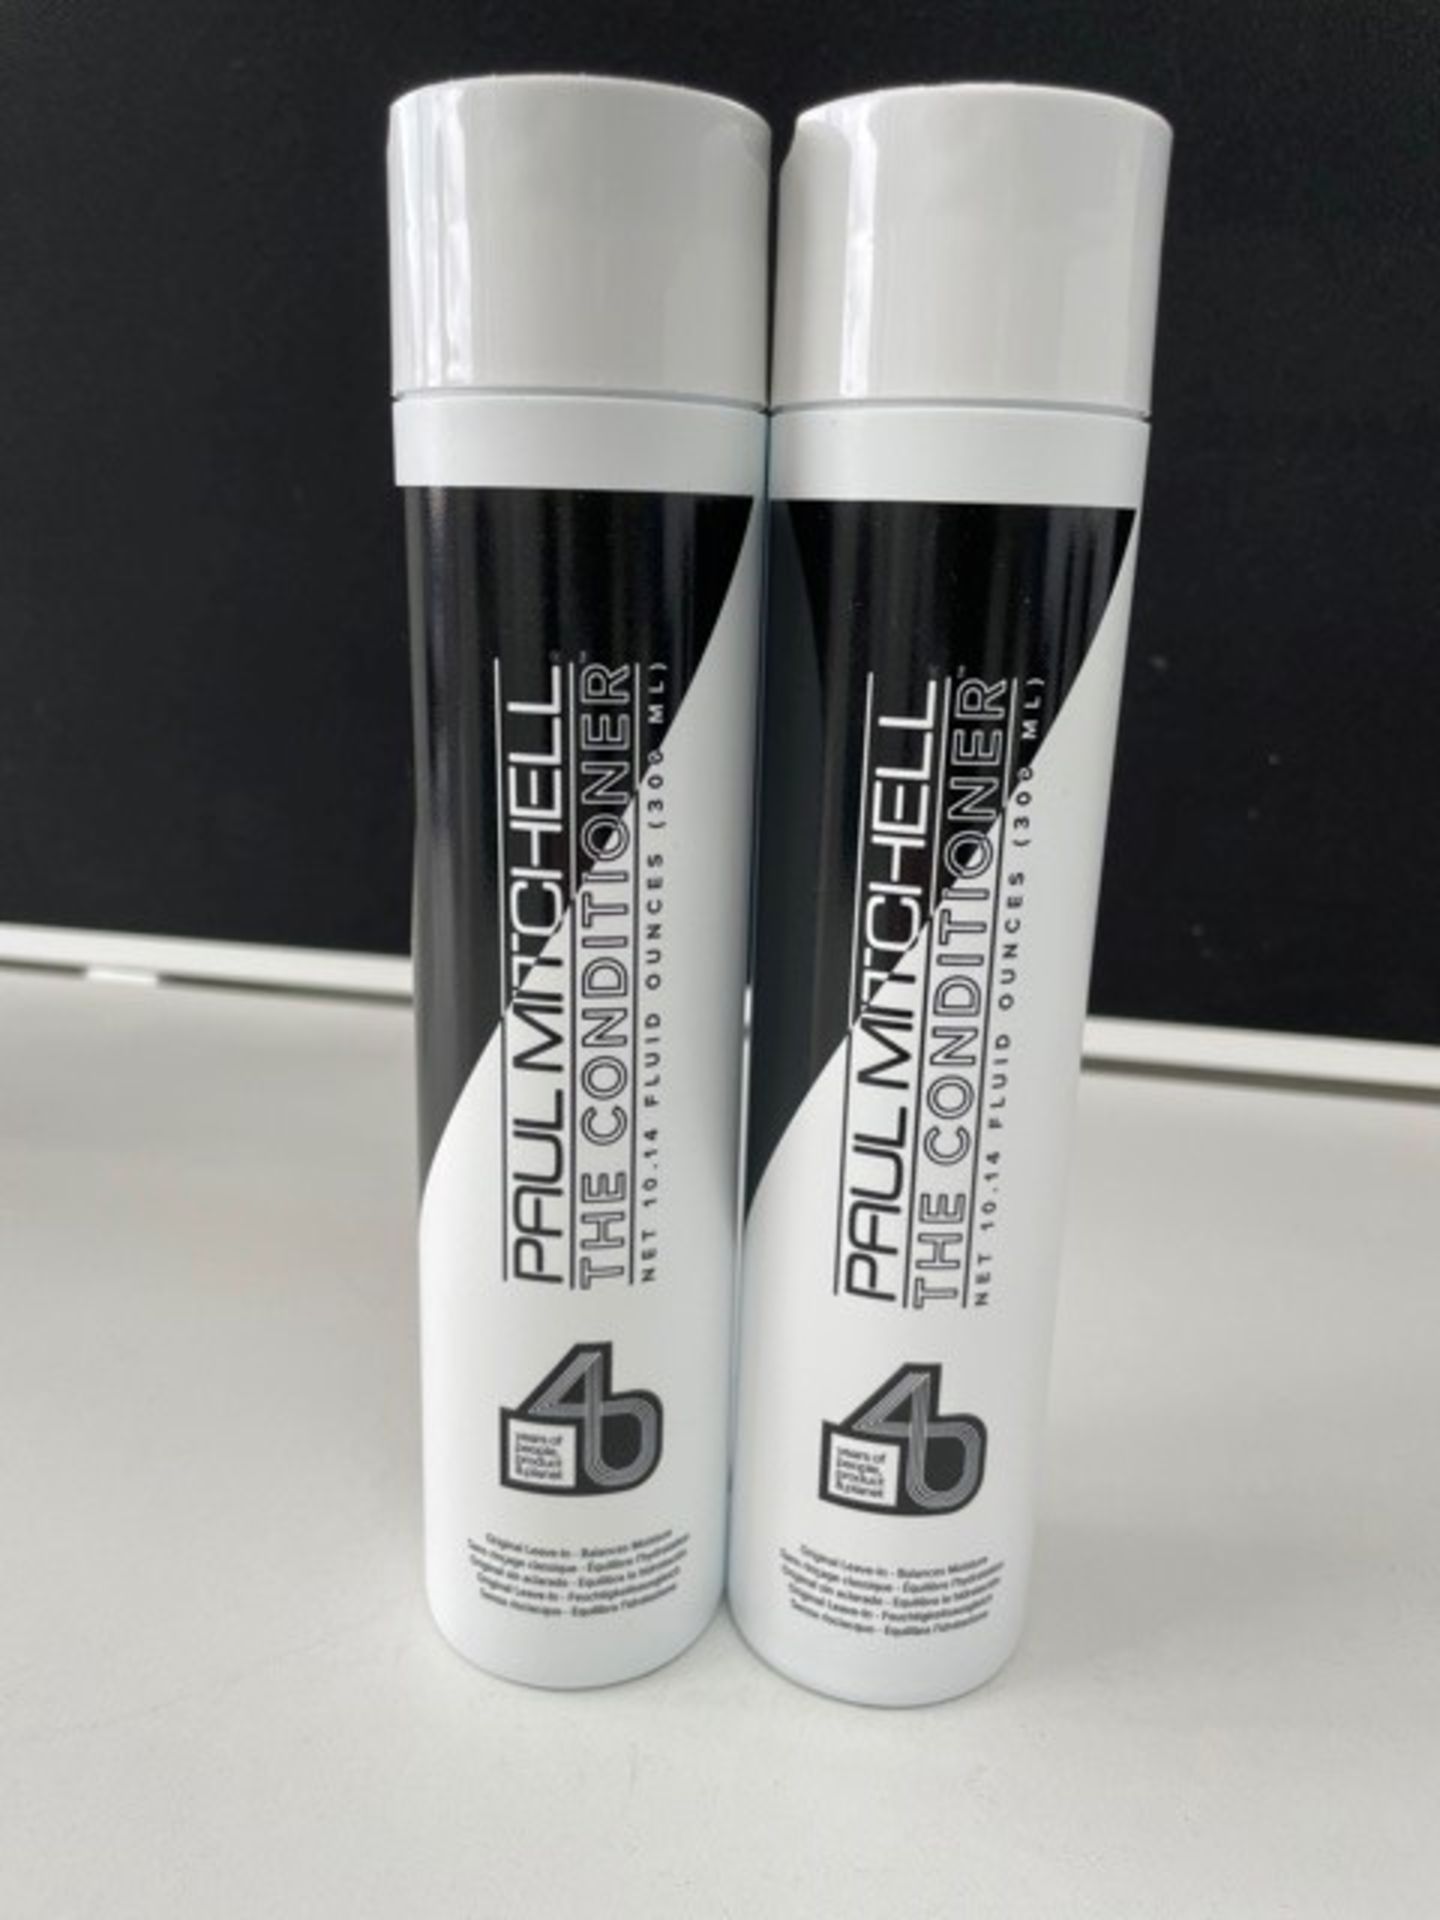 6 x Paul Mitchell Hair Care Products | See photographs and description | Total RRP £80 - Image 3 of 4